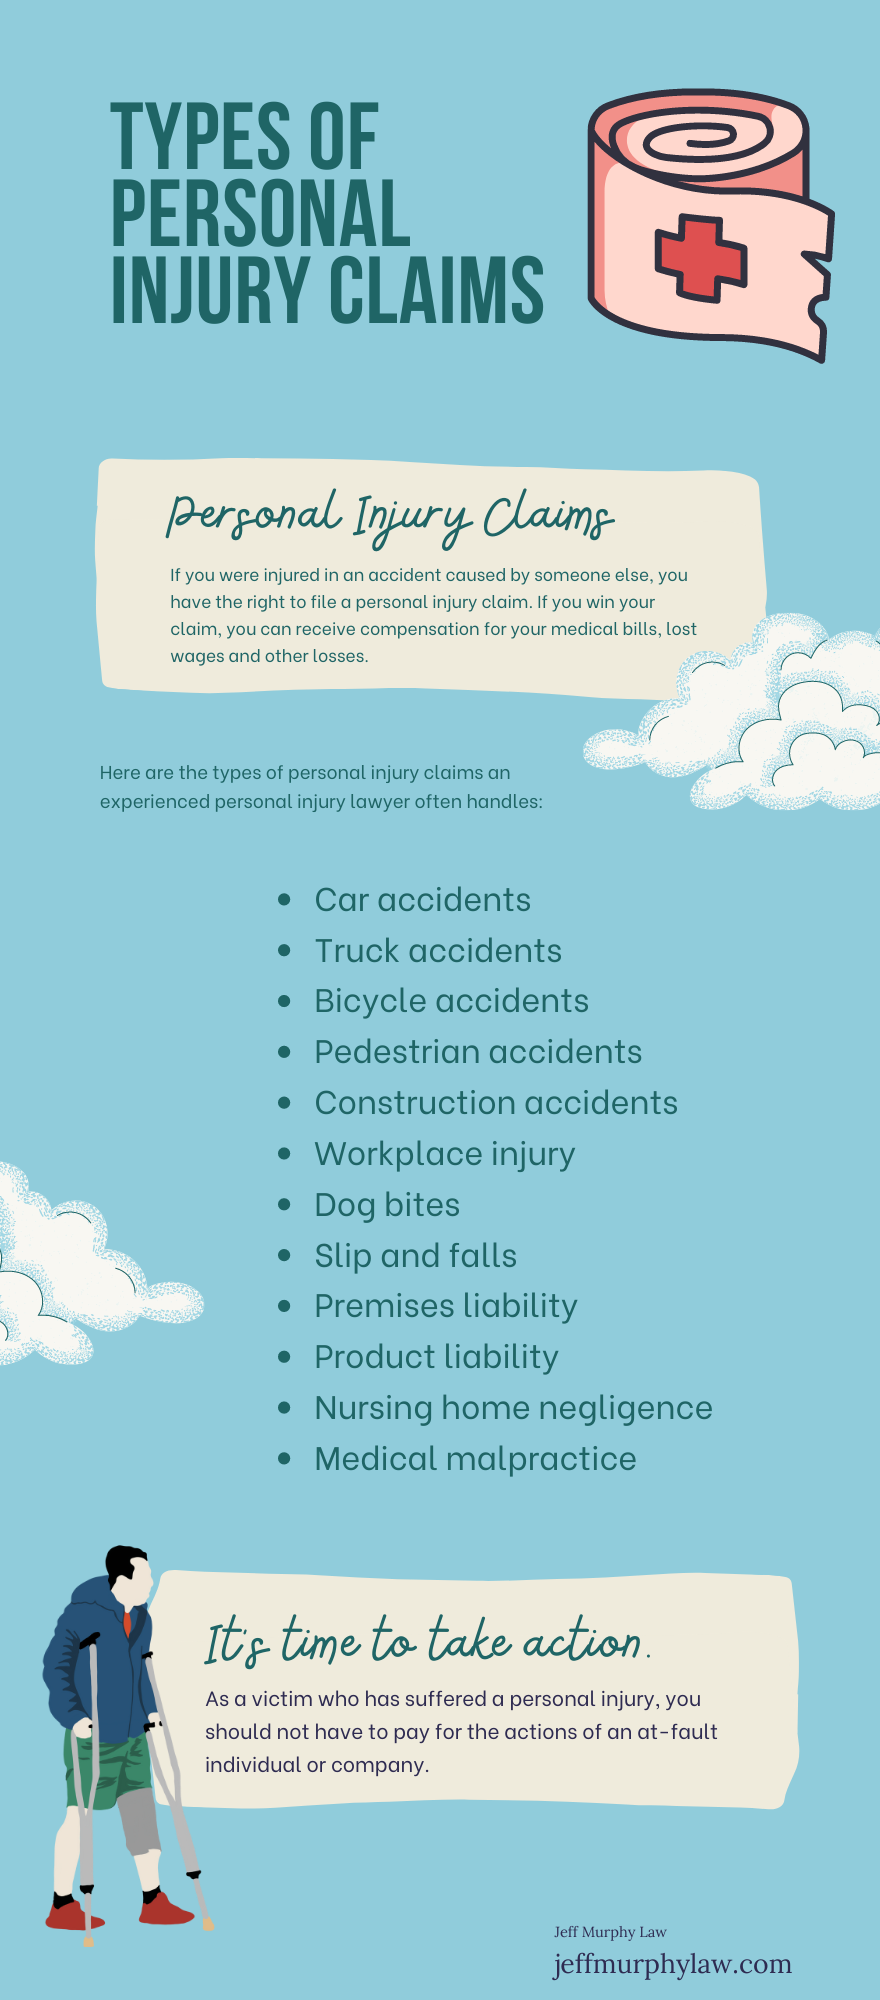 Types of Personal Injury Claims